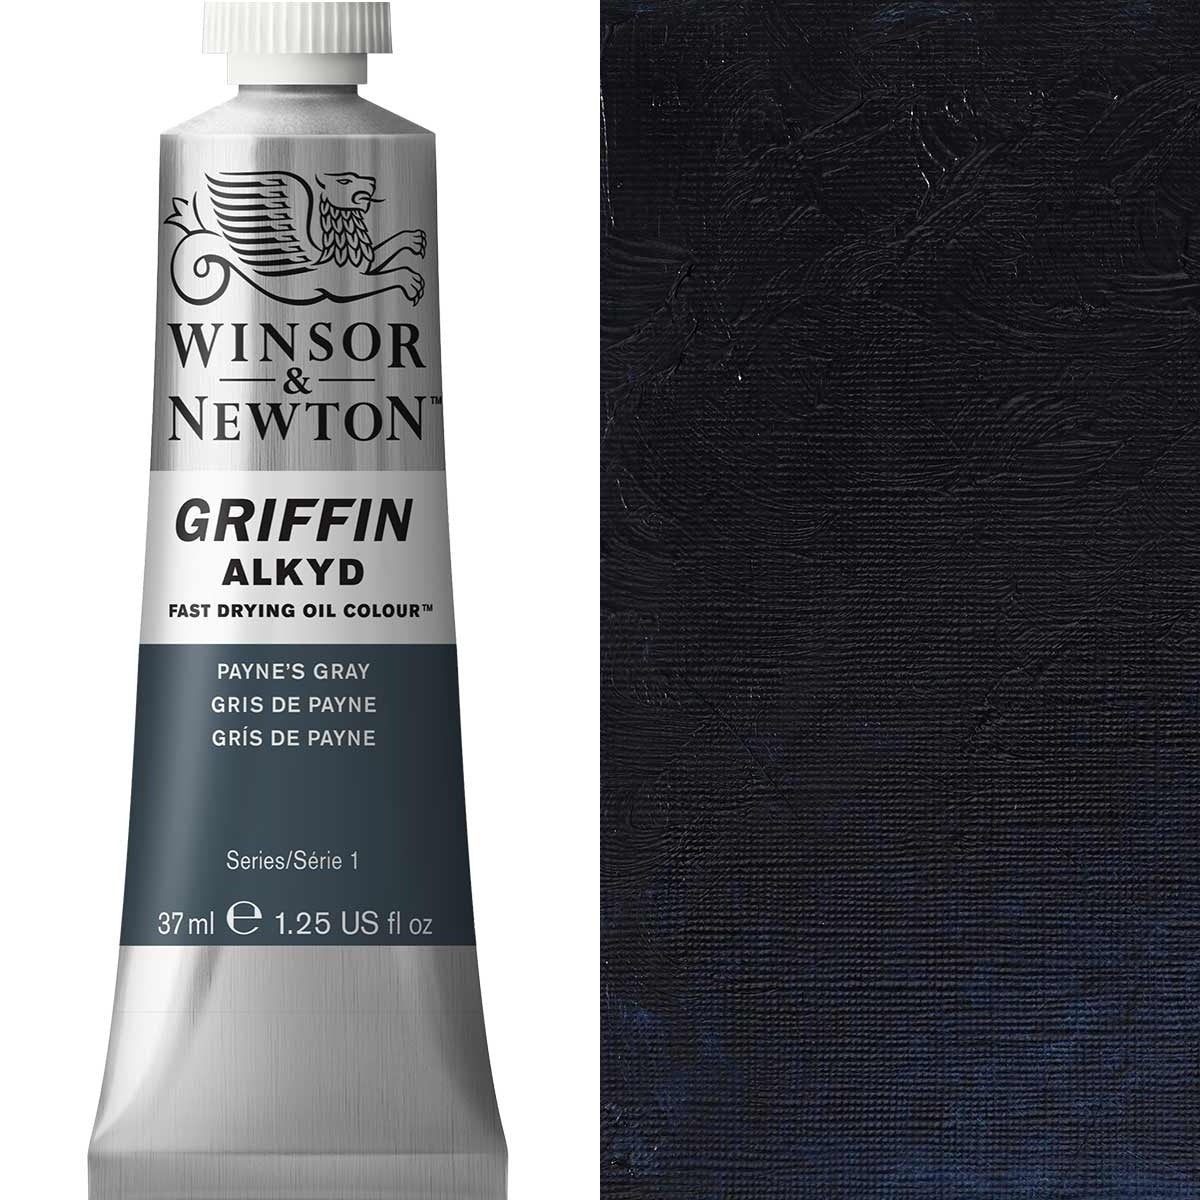 Winsor et Newton - Griffin Alkyd Oil Color - 37ml - Paynes Gray